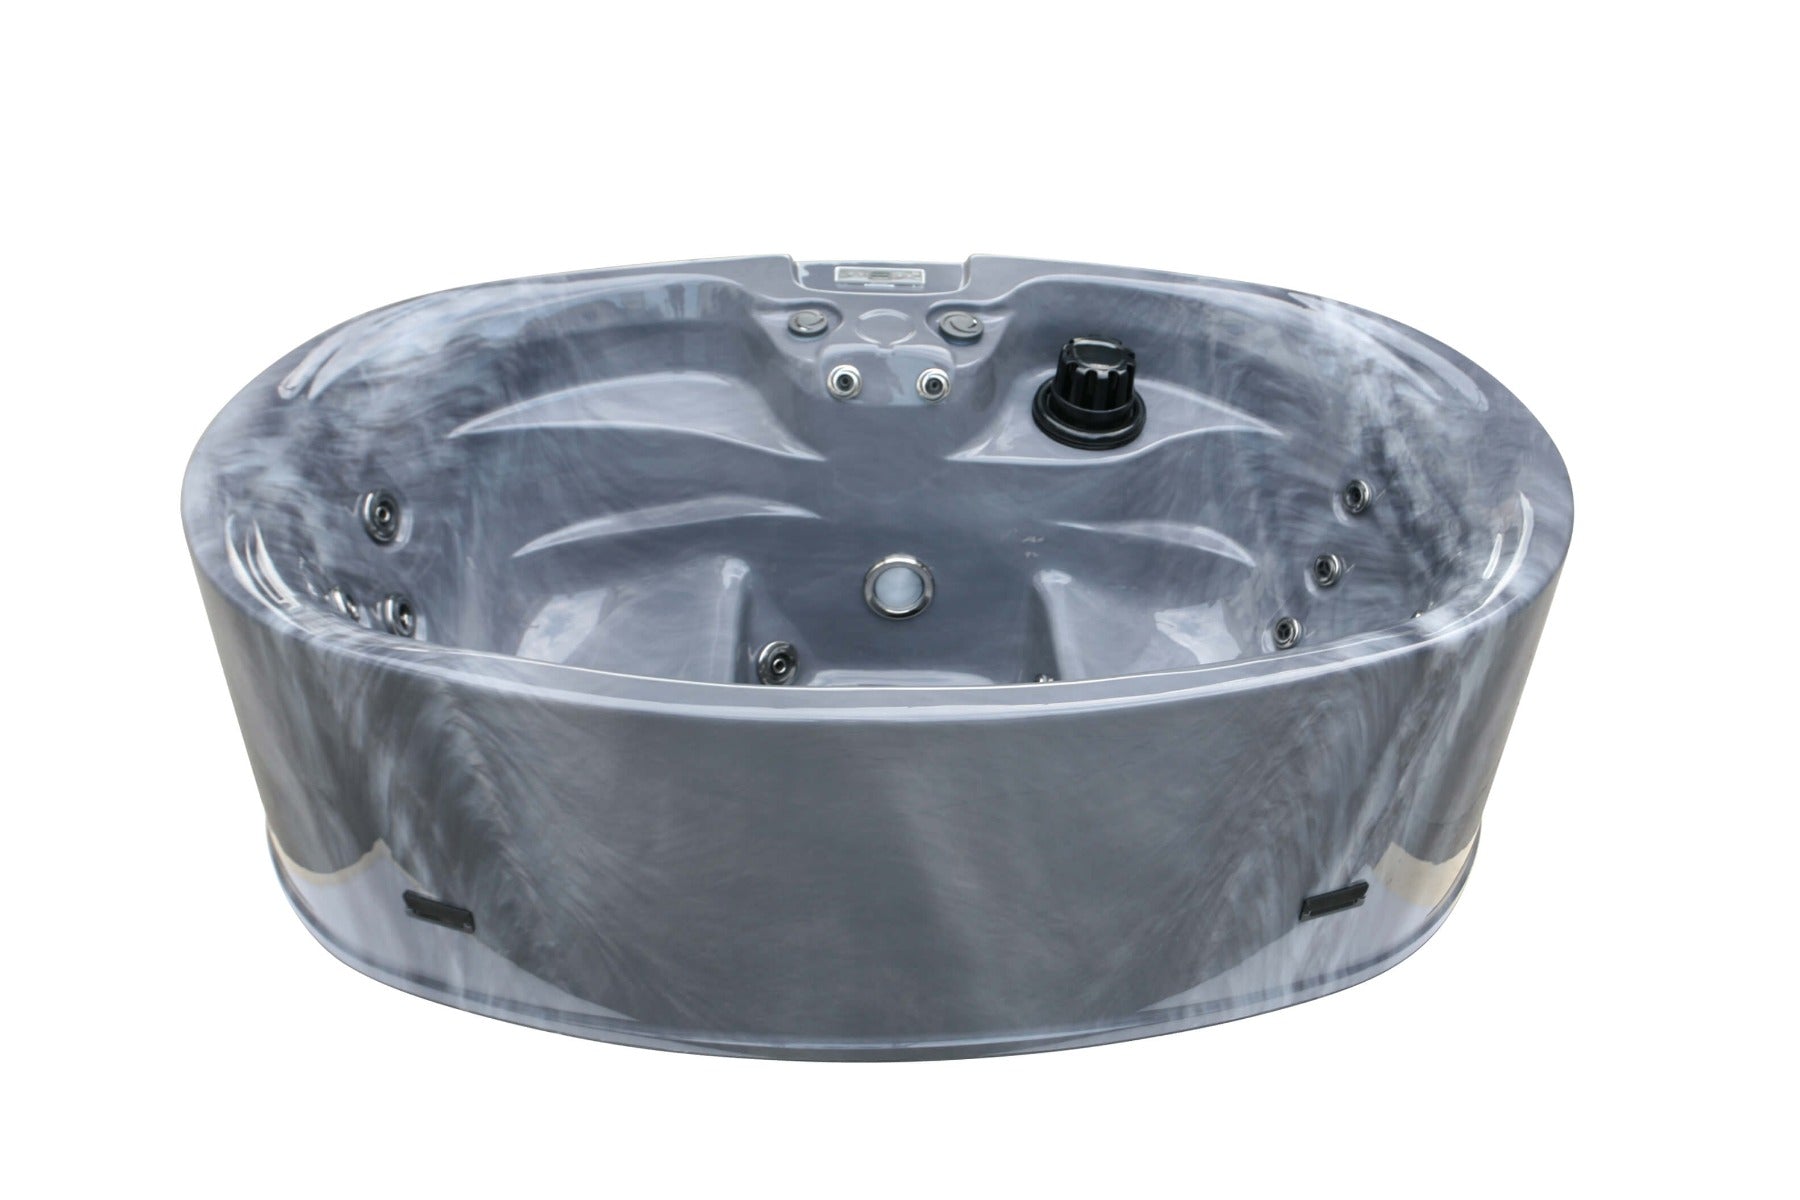 Just For 2 (13A Plug & Play) hot tub by H2O Hot Tubs